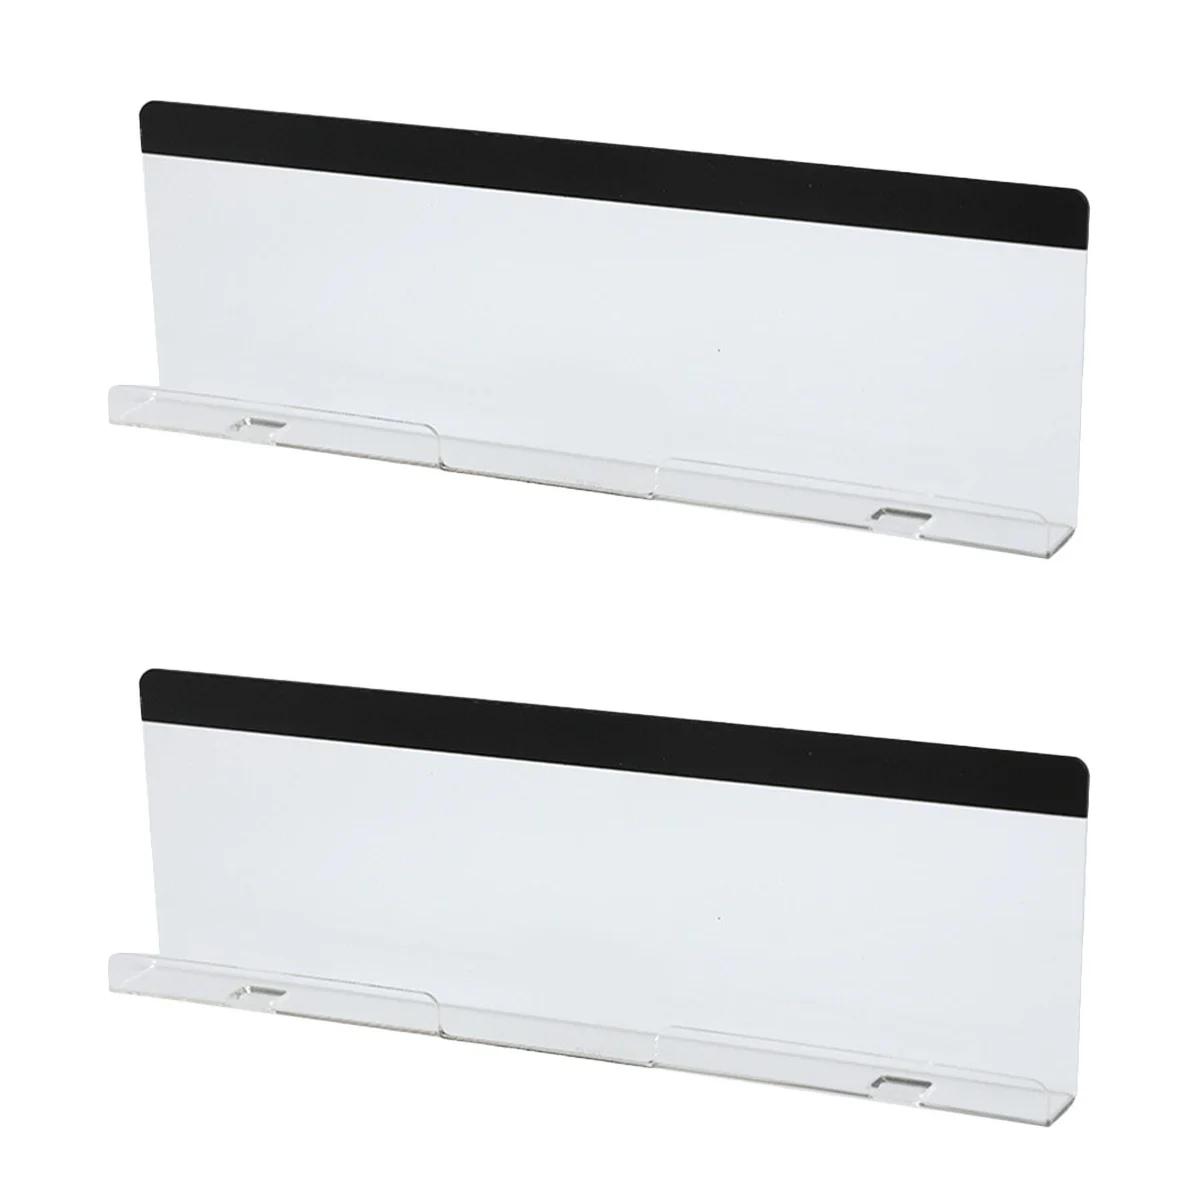 

2 Pack Message Parcel Shelf Adhesive Monitor Board Compter Monitors Computer Memo Notes Boards Acrylic Sticky Office Moniter